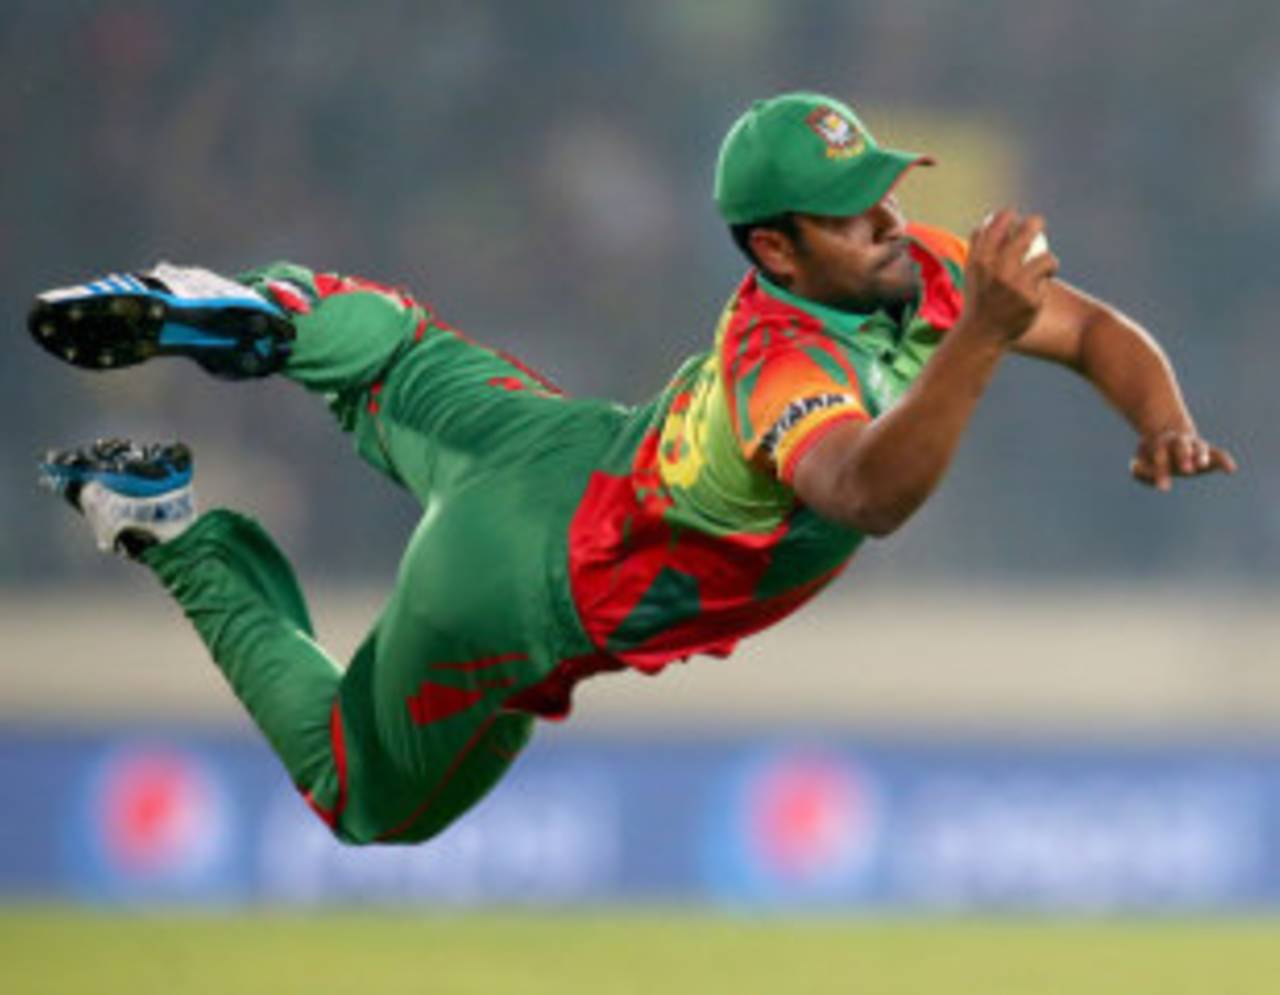 Tamim's catch was the only bright spot in the day for the Bangladesh fans&nbsp;&nbsp;&bull;&nbsp;&nbsp;Getty Images